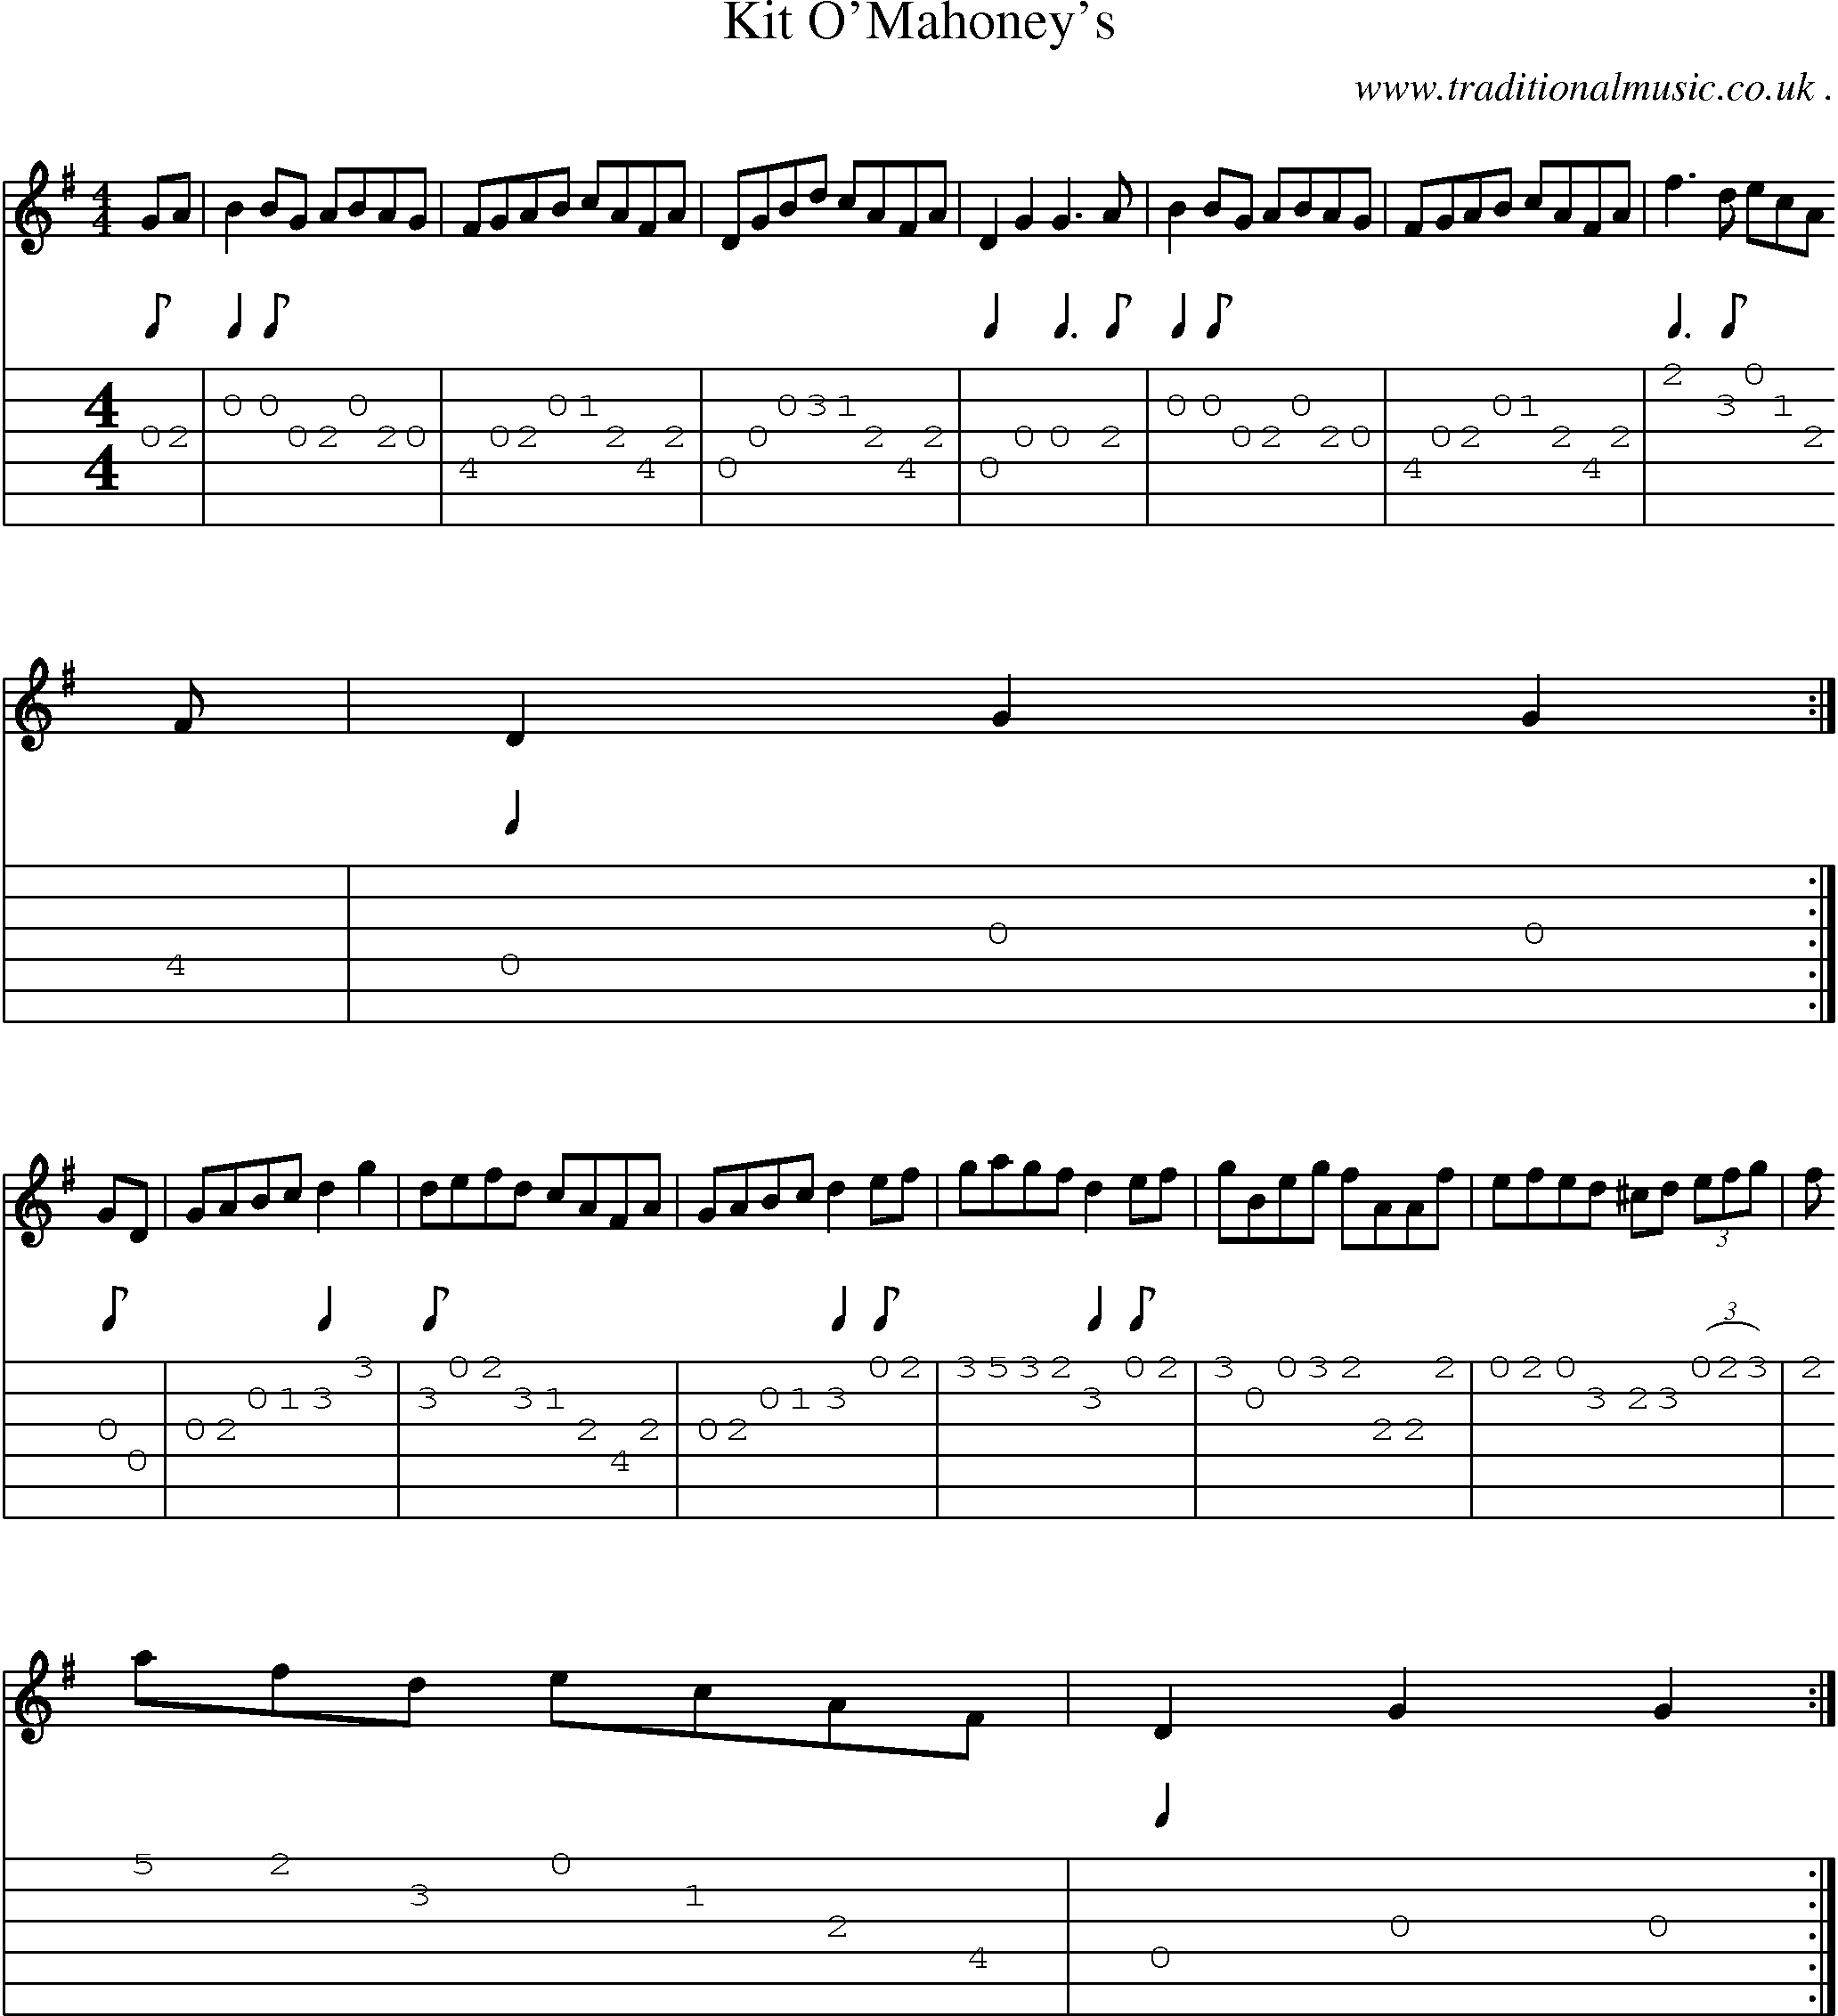 Sheet-Music and Guitar Tabs for Kit Omahoneys